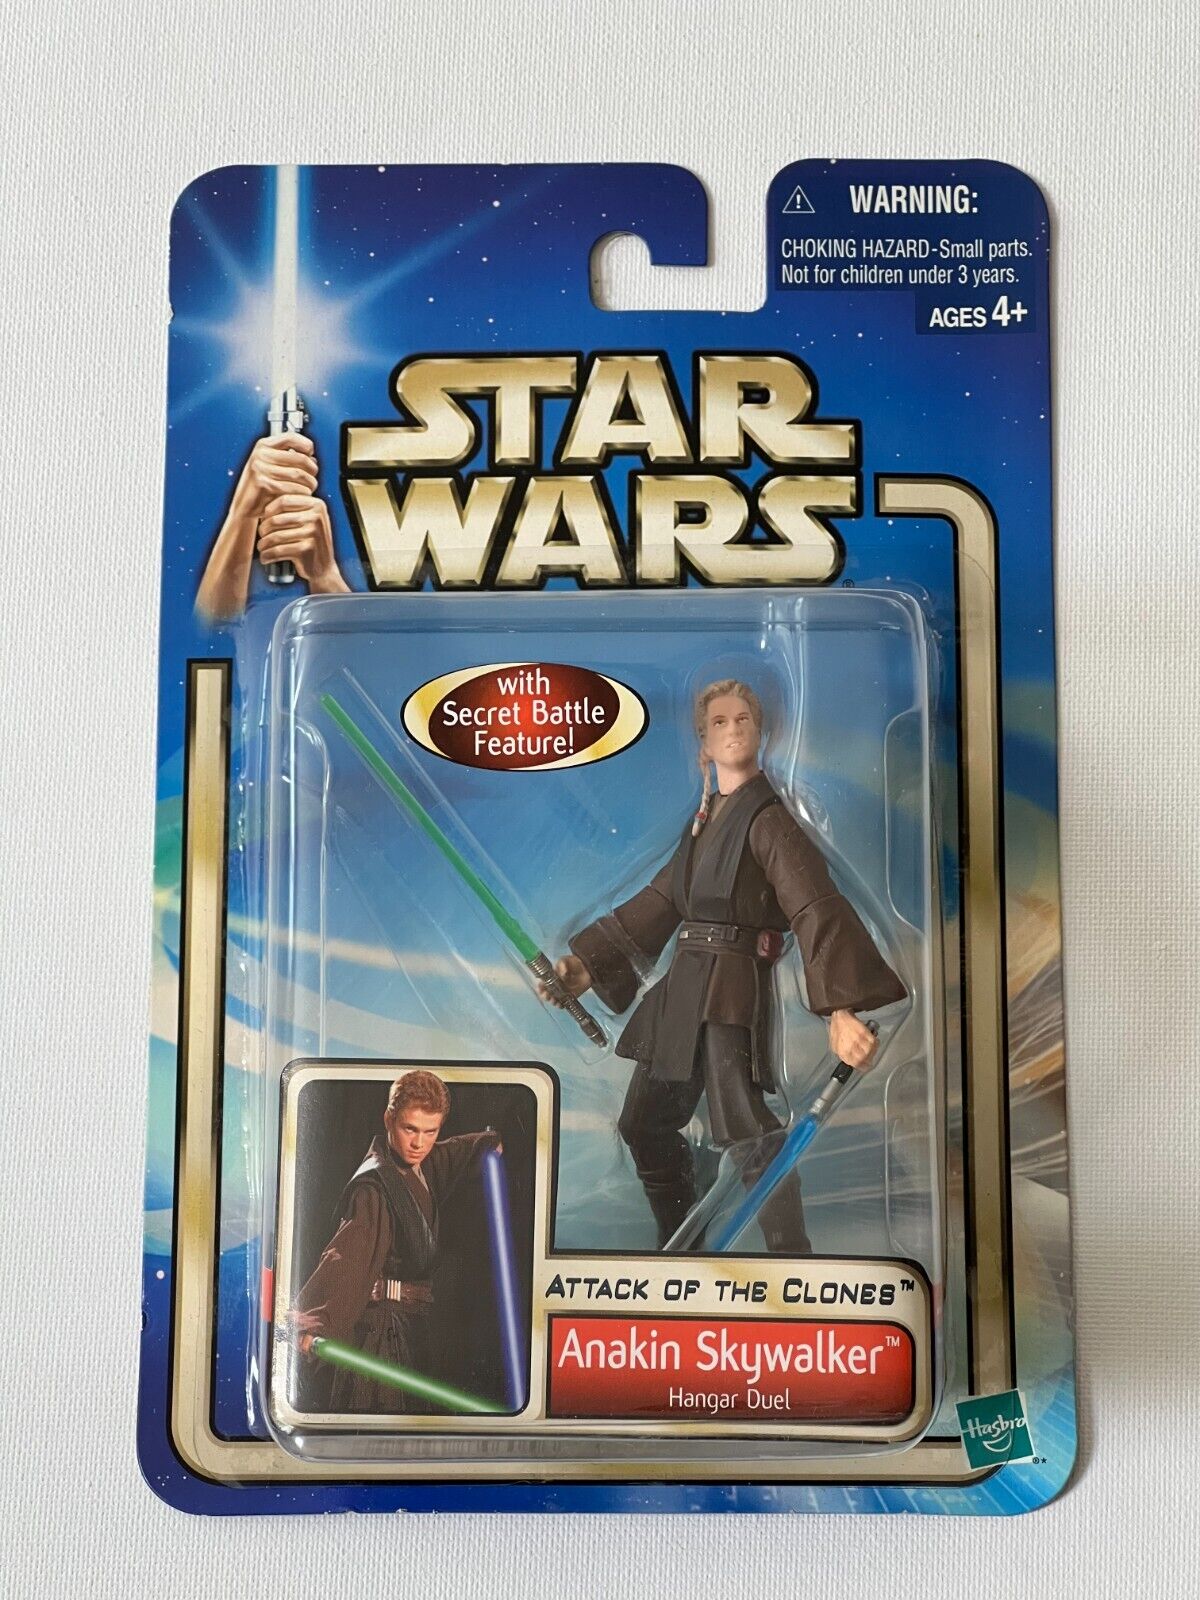 Action Figure:Anakin Skywalker: Hanger Duel:Star Wars Action Figure Lot by Hasbro (NEW IN BOX): Build Your Own Collection!